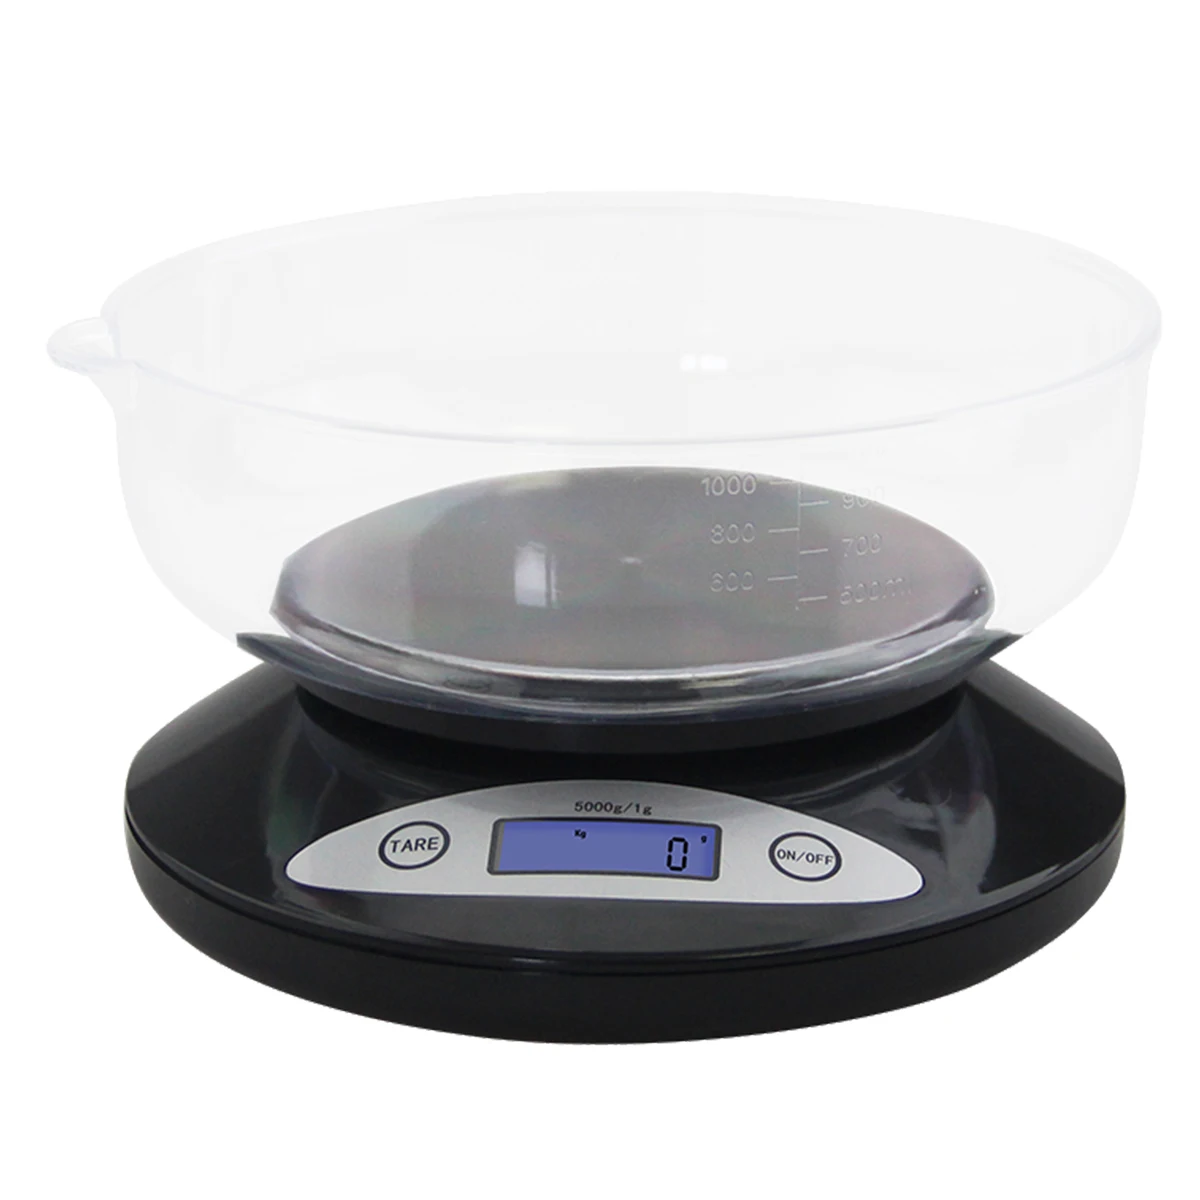 https://ae01.alicdn.com/kf/S788482de1c874d218625952a850e4287E/Digital-Scale-LCD-balance-Kitchen-Scale-Electronic-Weighing-Scales-Parcel-Food-Weights-Balance-for-Kitchen-with.jpg